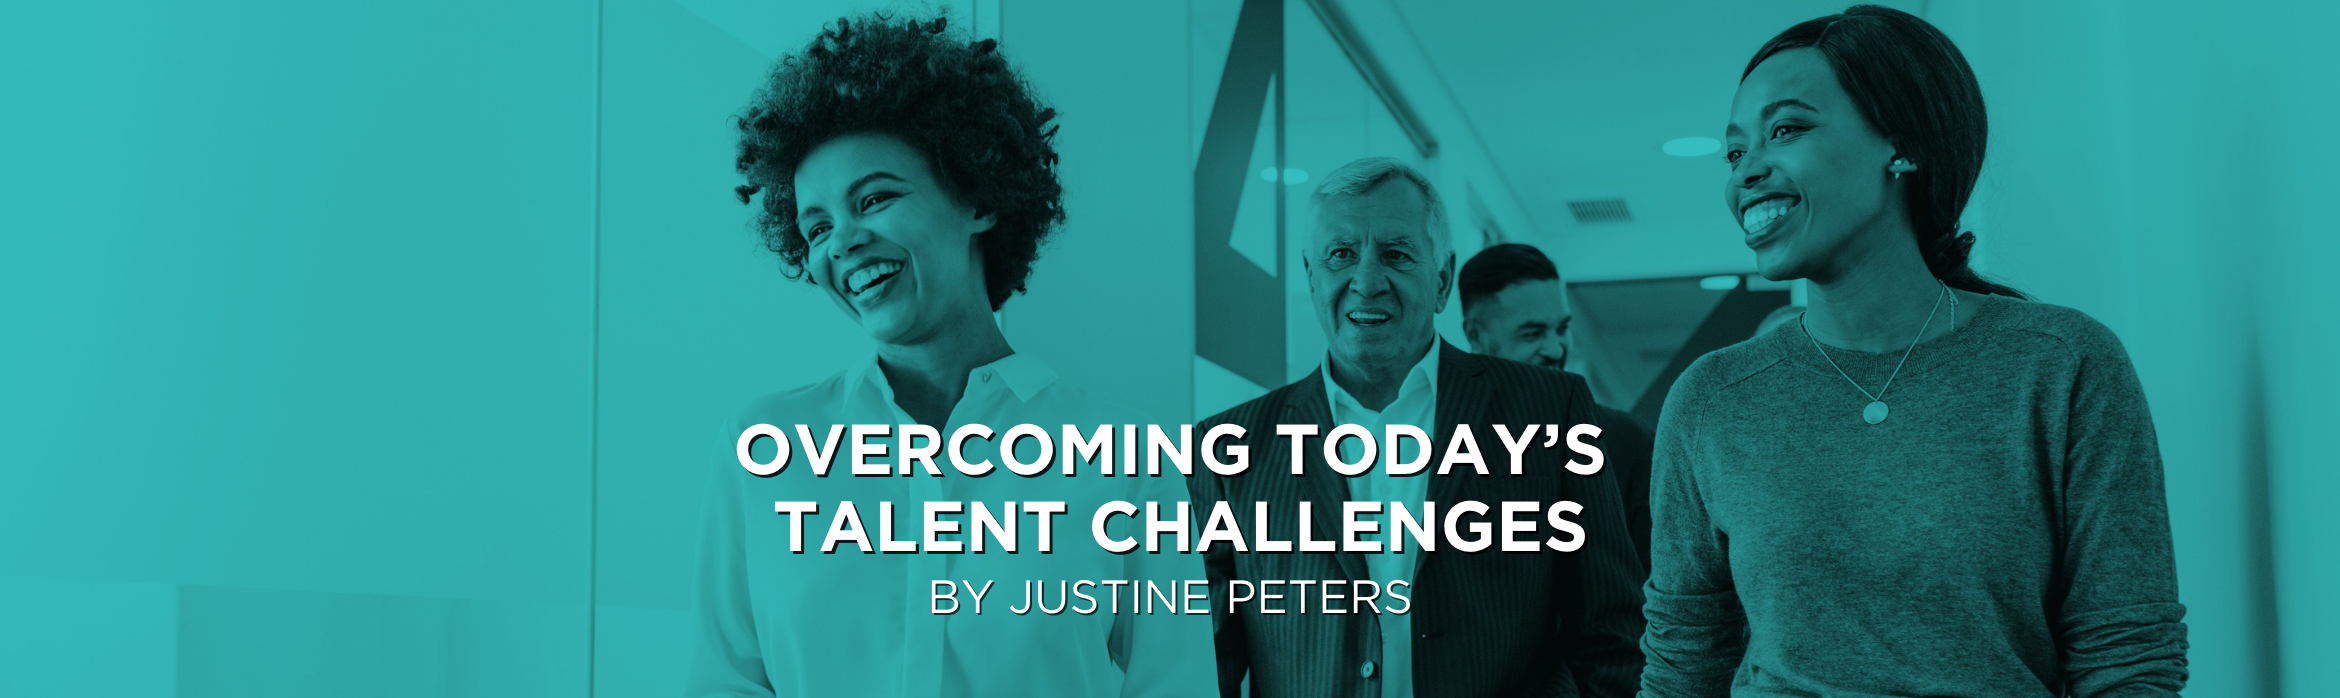 Overcoming Today’s Talent Challenges